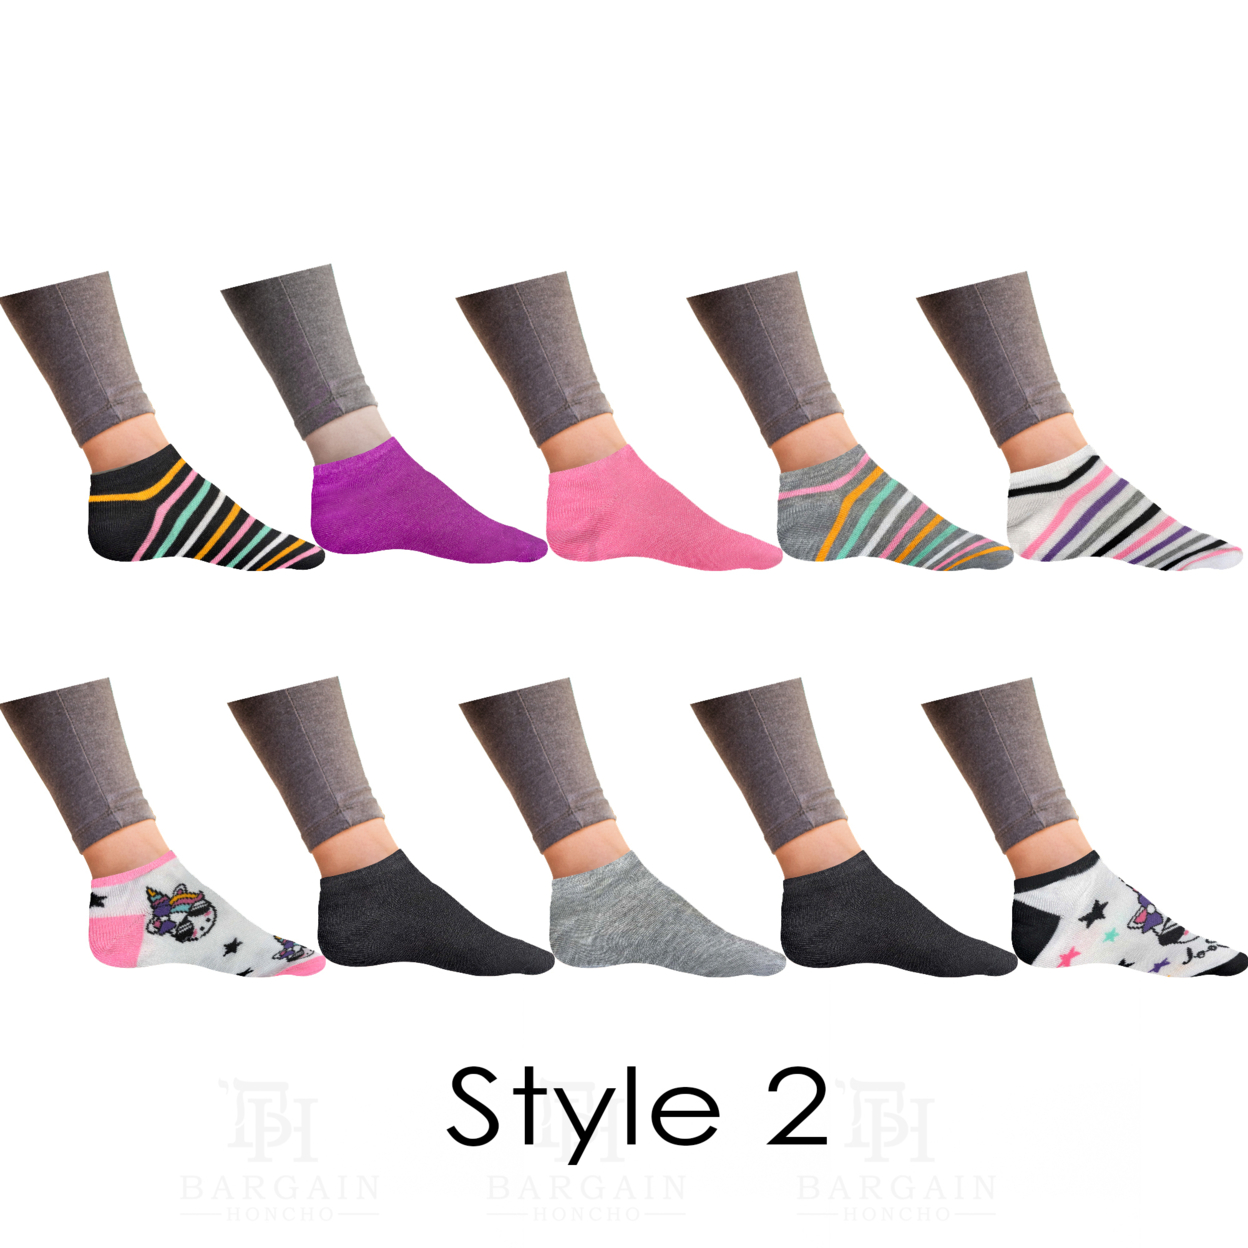 20-Pairs: Women’s Breathable Colorful Fun No Show Low Cut Ankle Socks - 2 & 5